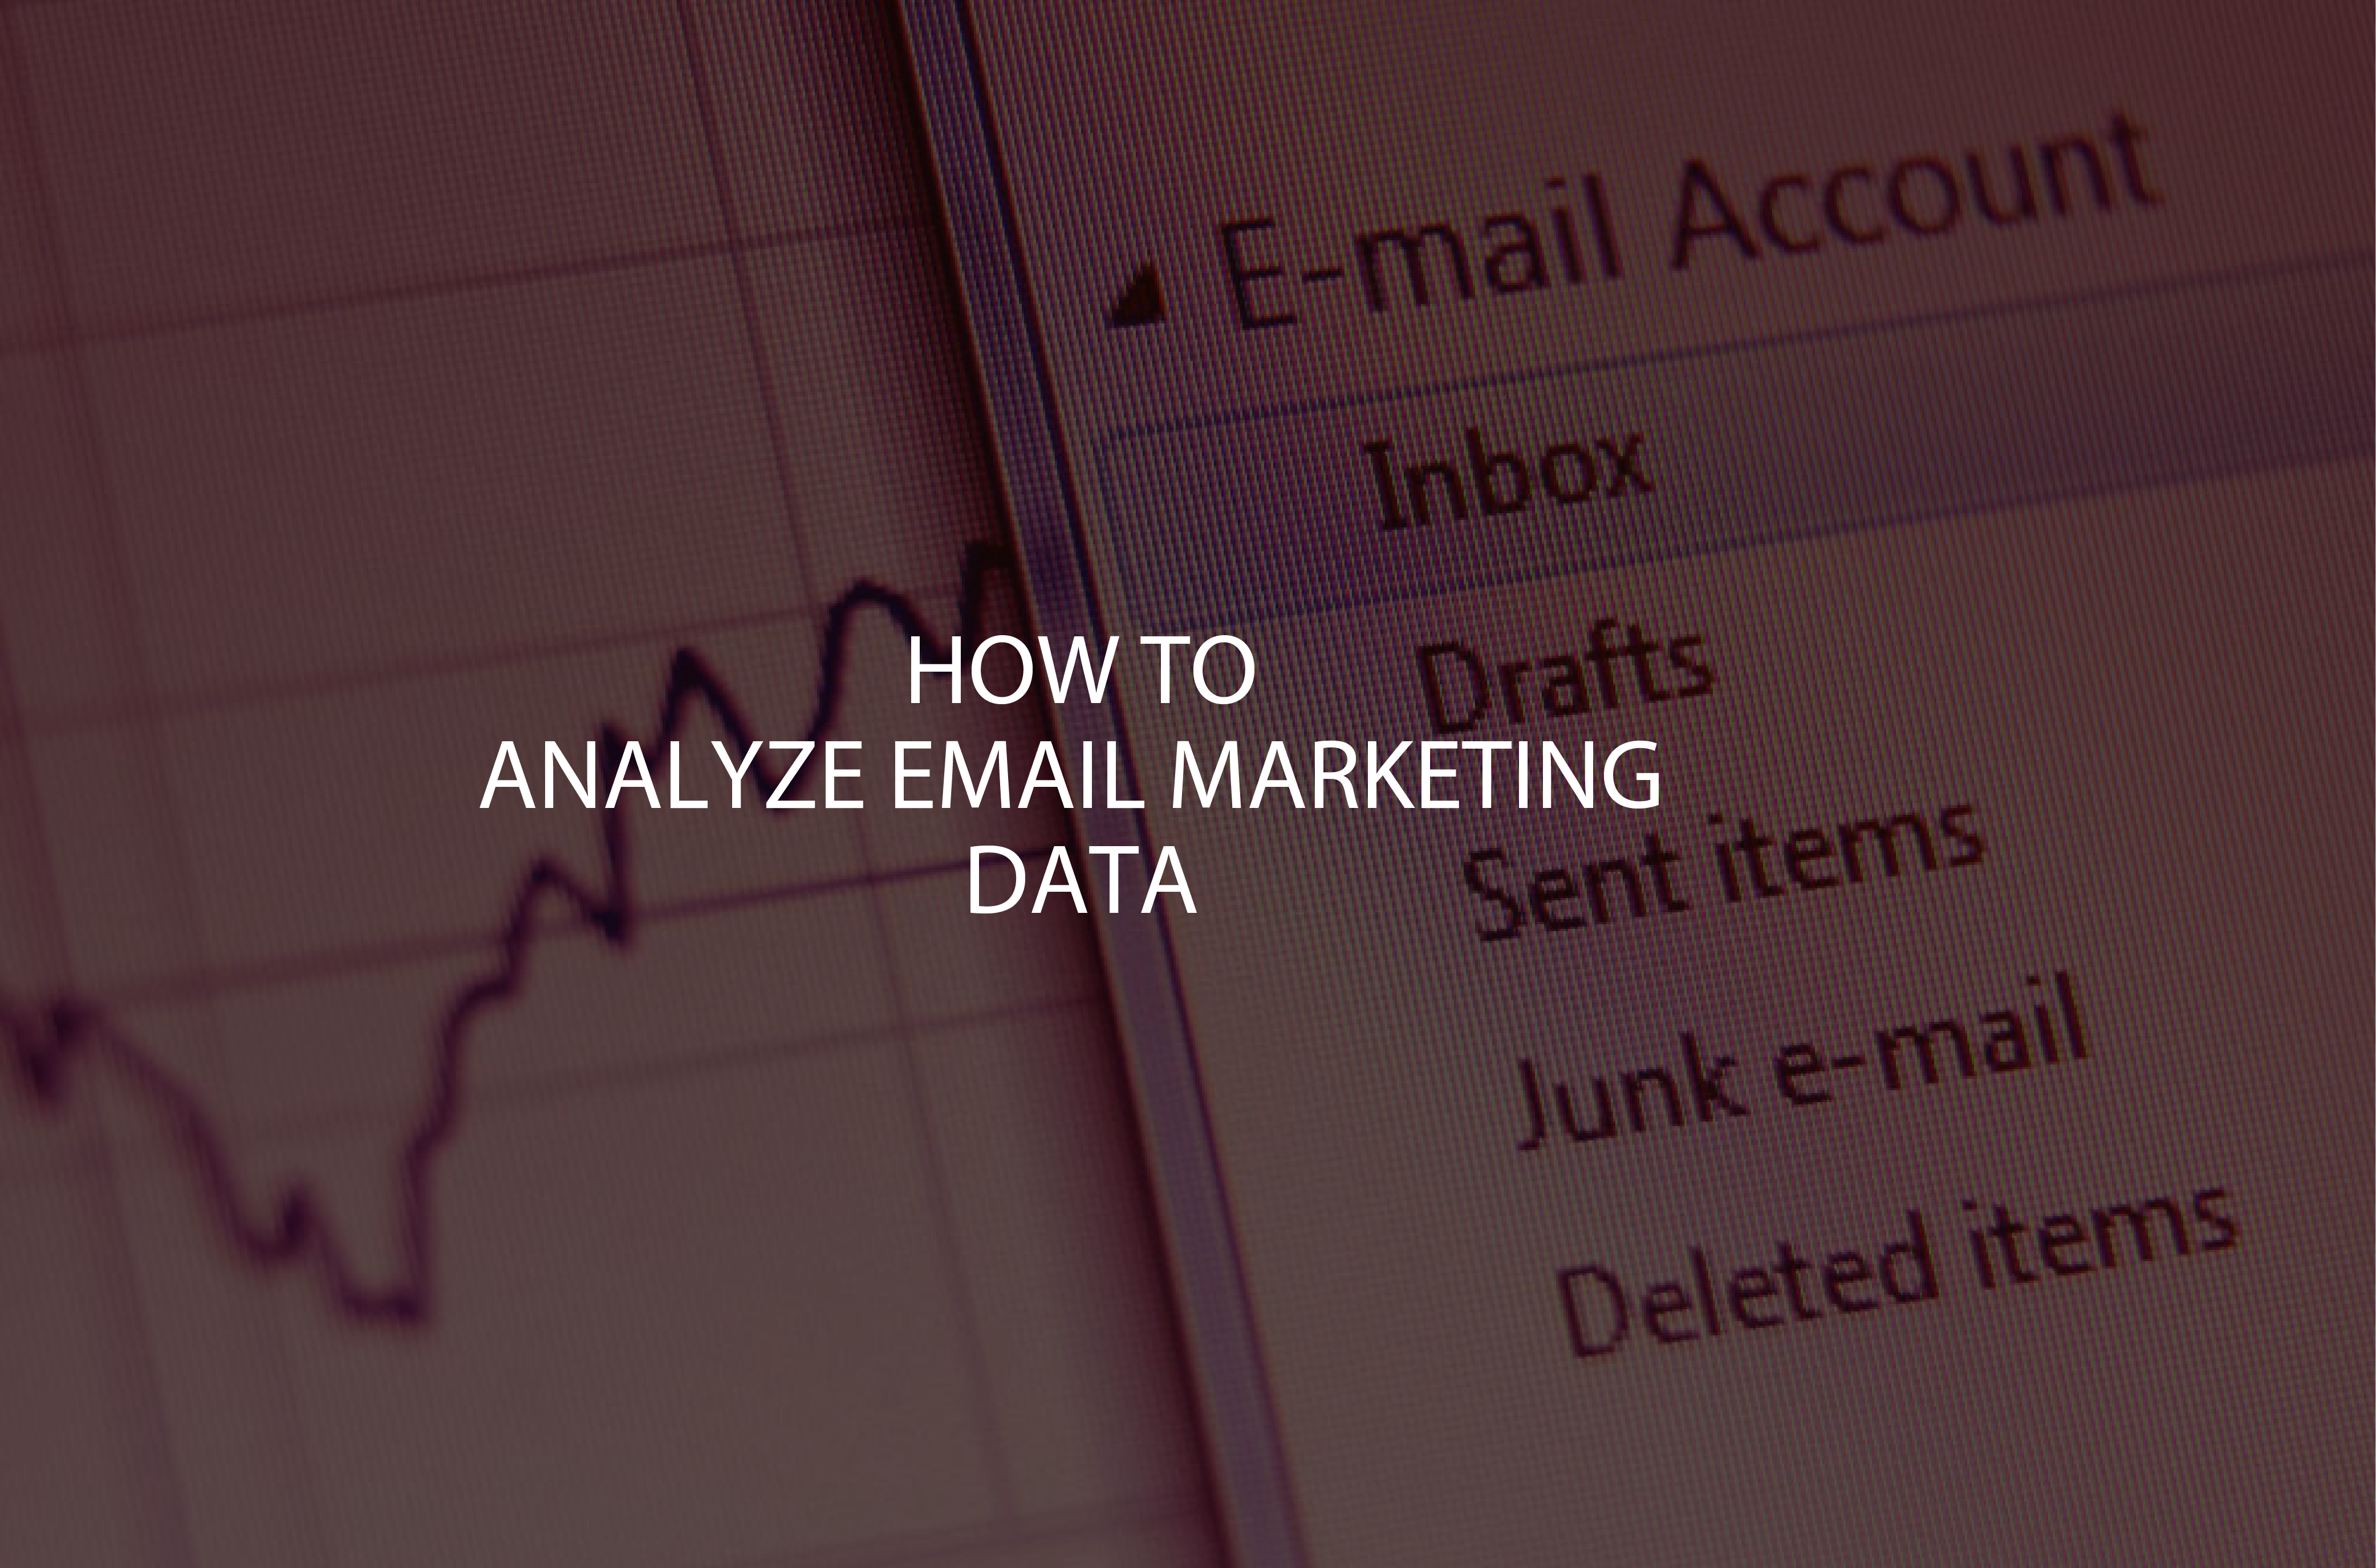 Everything Marketers Need to Know About Analyzing Their Email Marketing Data